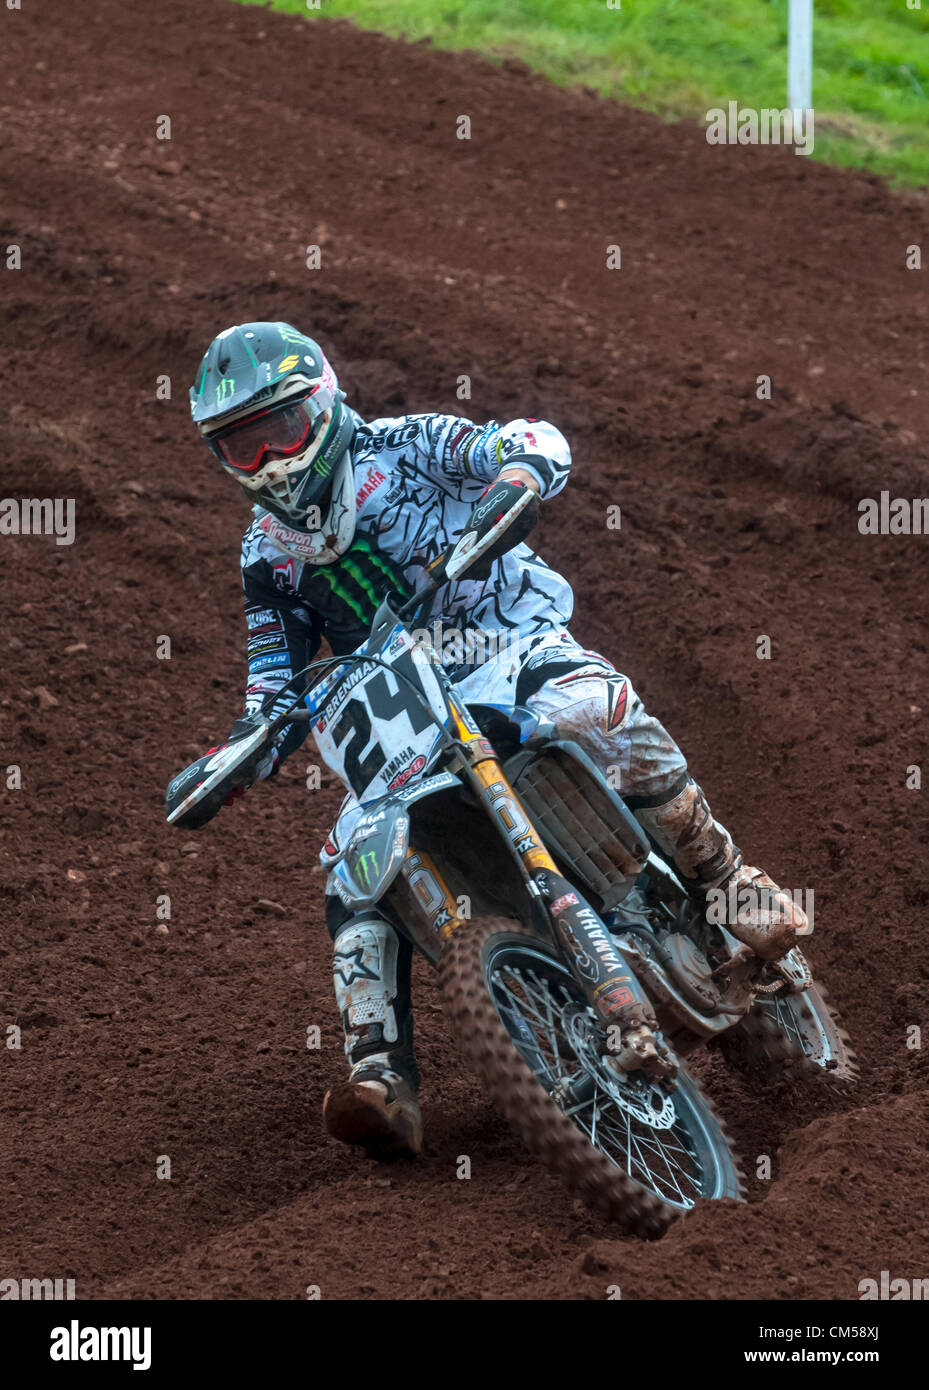 Shaun Simpson on the Monster Energy Bike It Yamaha racing in race 1 of the MAXXIS British Motocross Championship MX 1 at Little SIlver race track in Exeter. Stock Photo